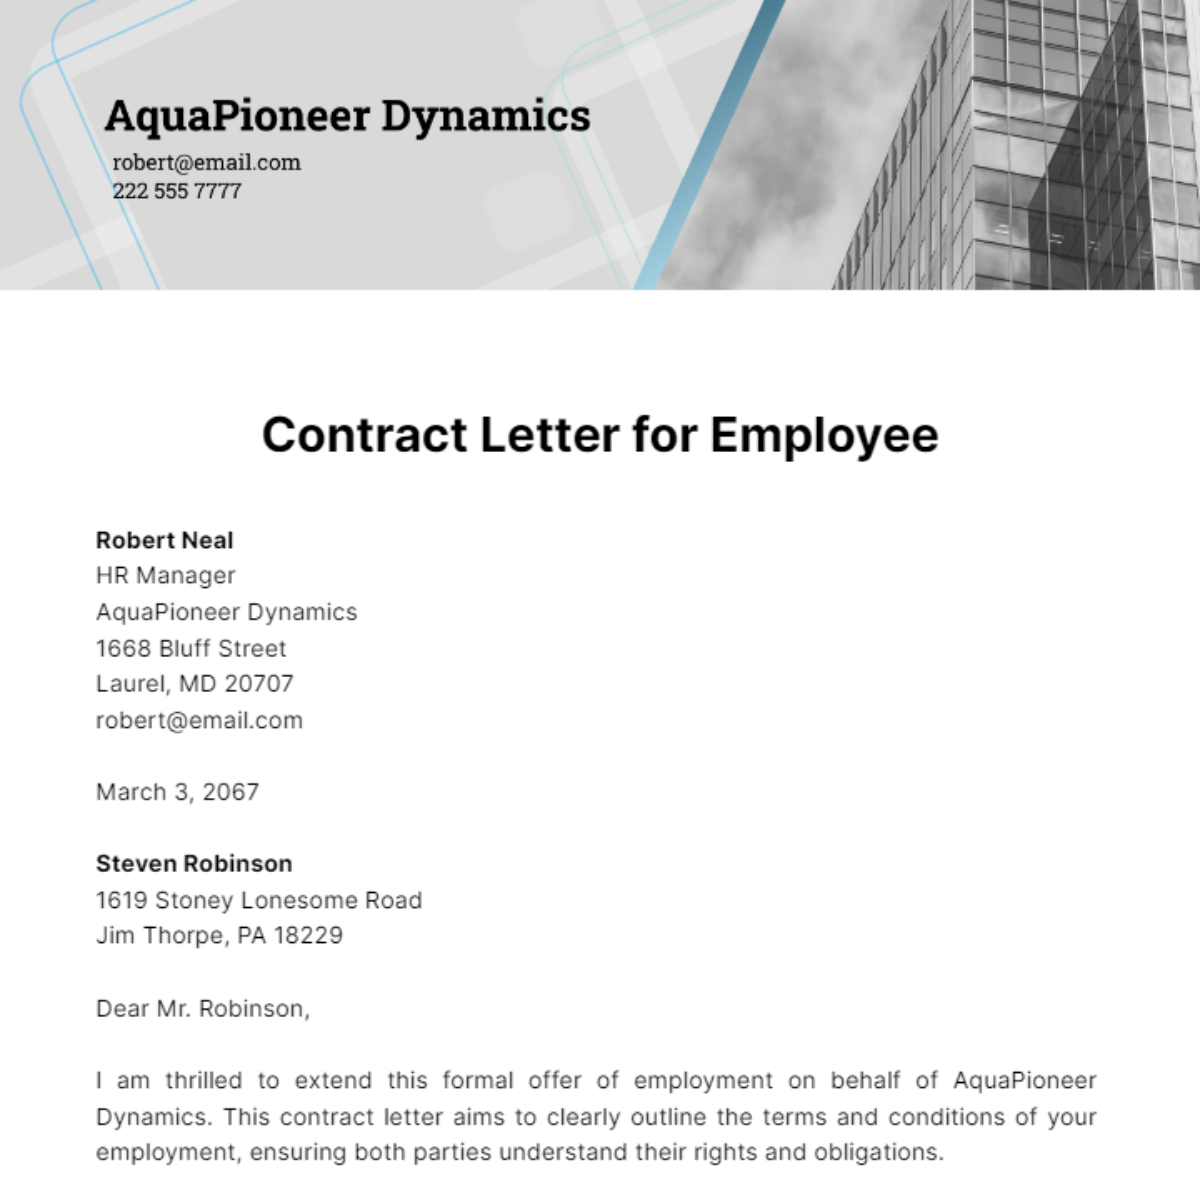 Contract Letter for Employee Template